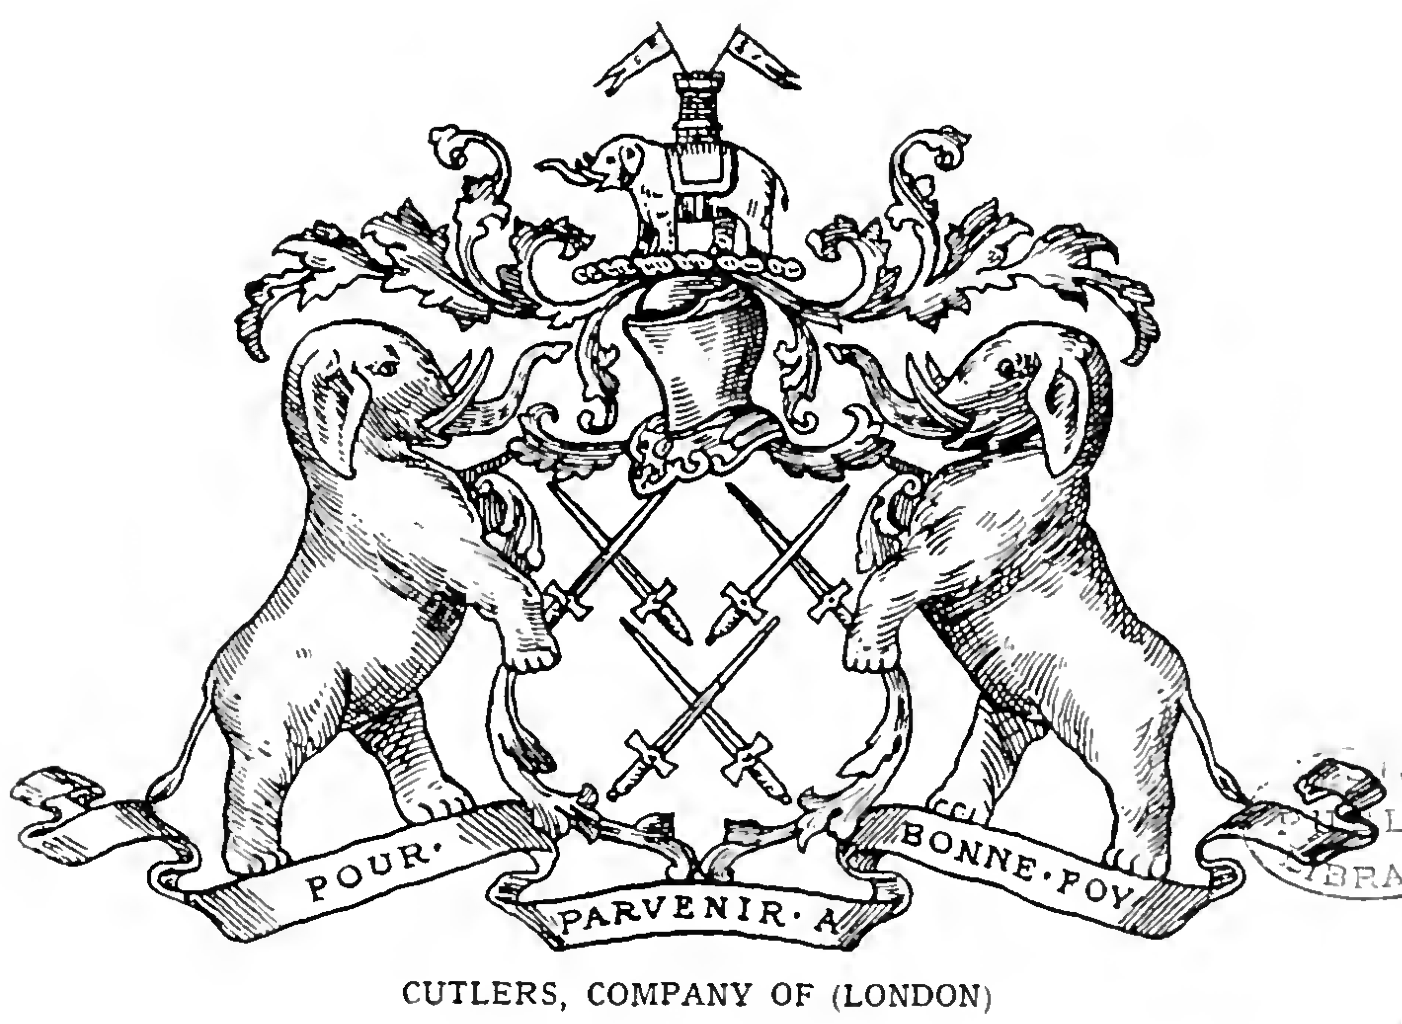 CUTLERS, The Worshipful Company of (London).